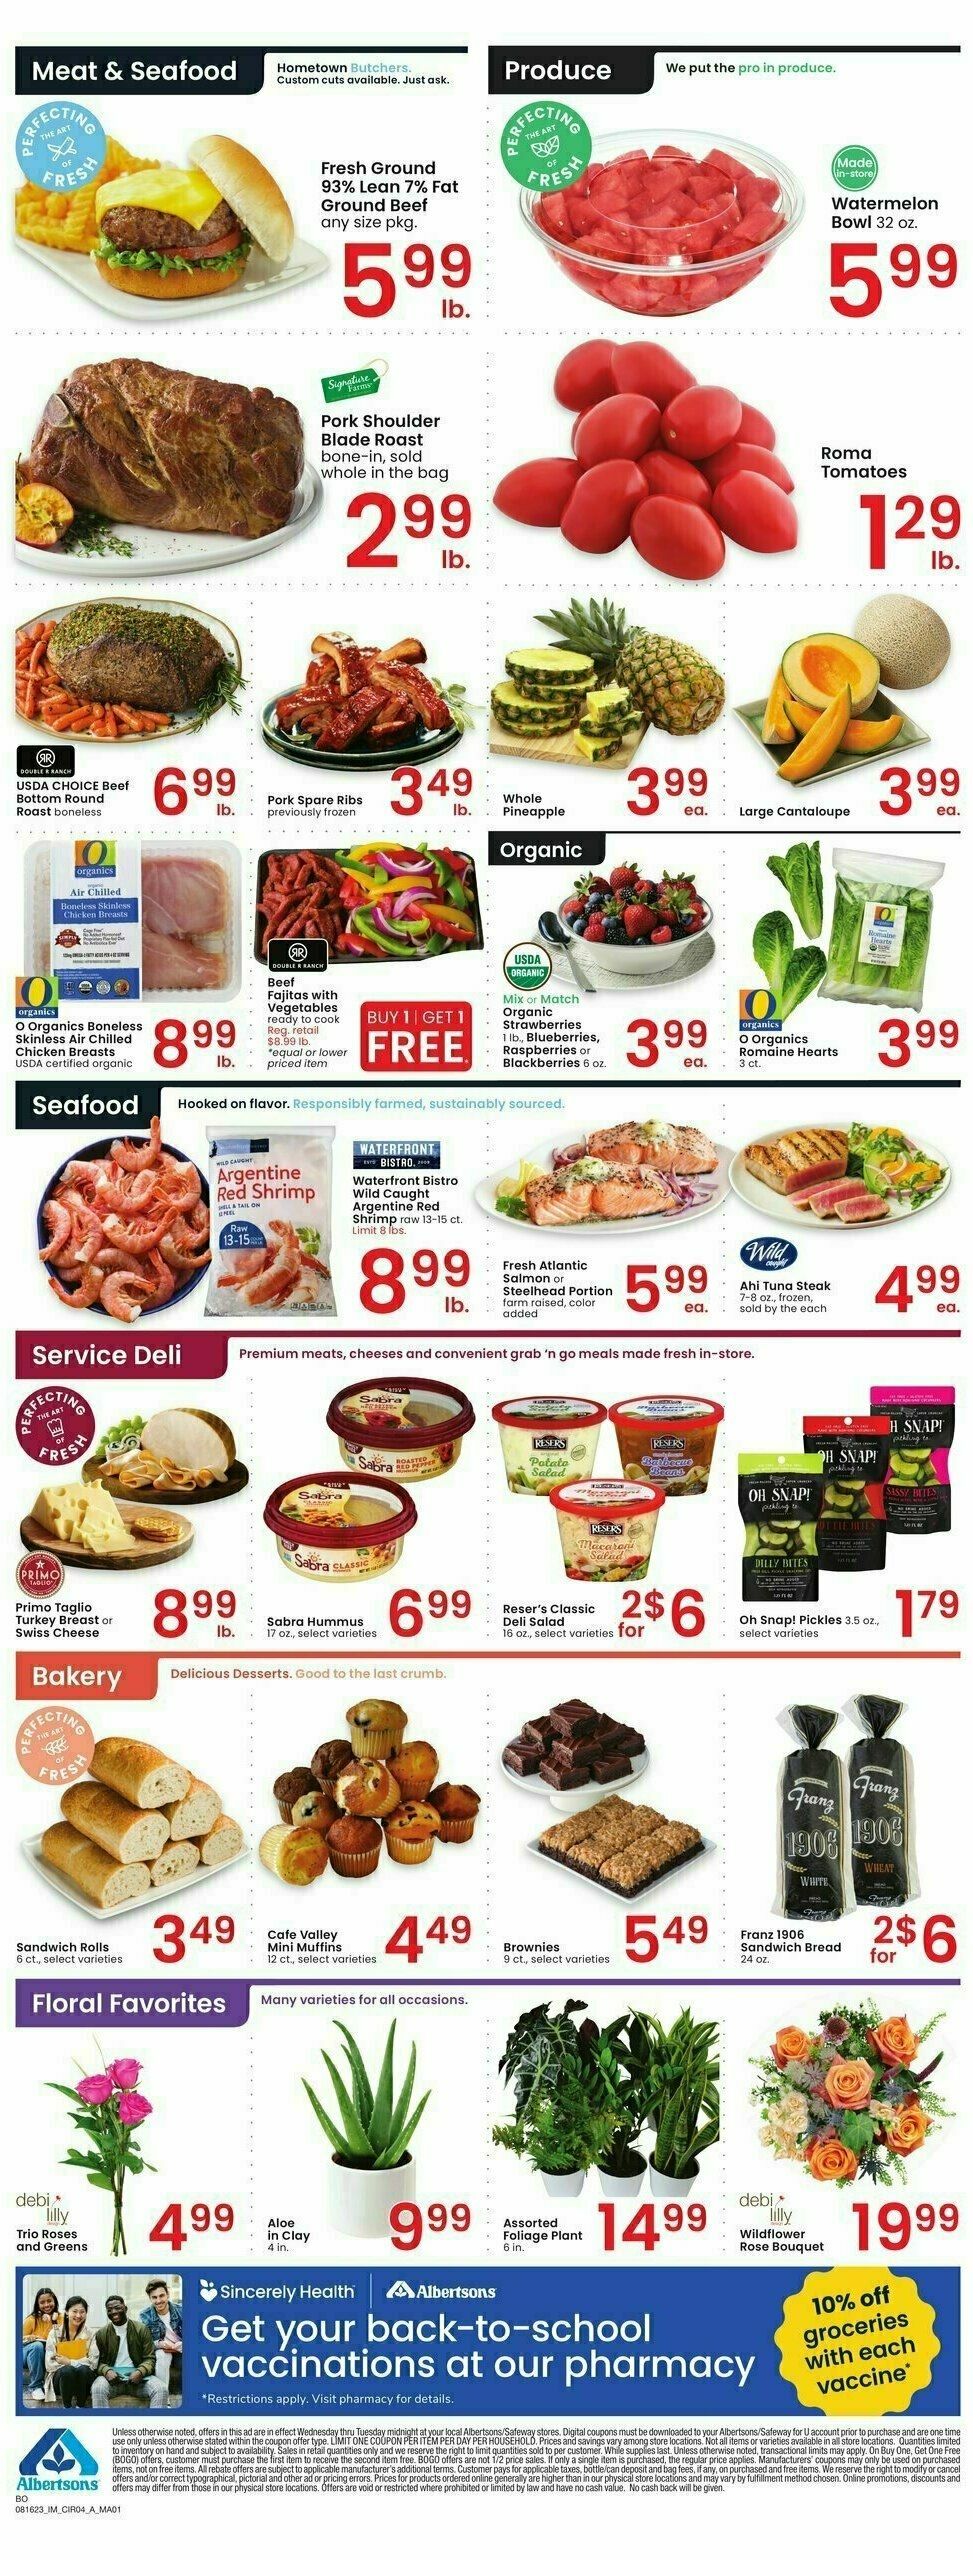 Albertsons Weekly Ad from August 16